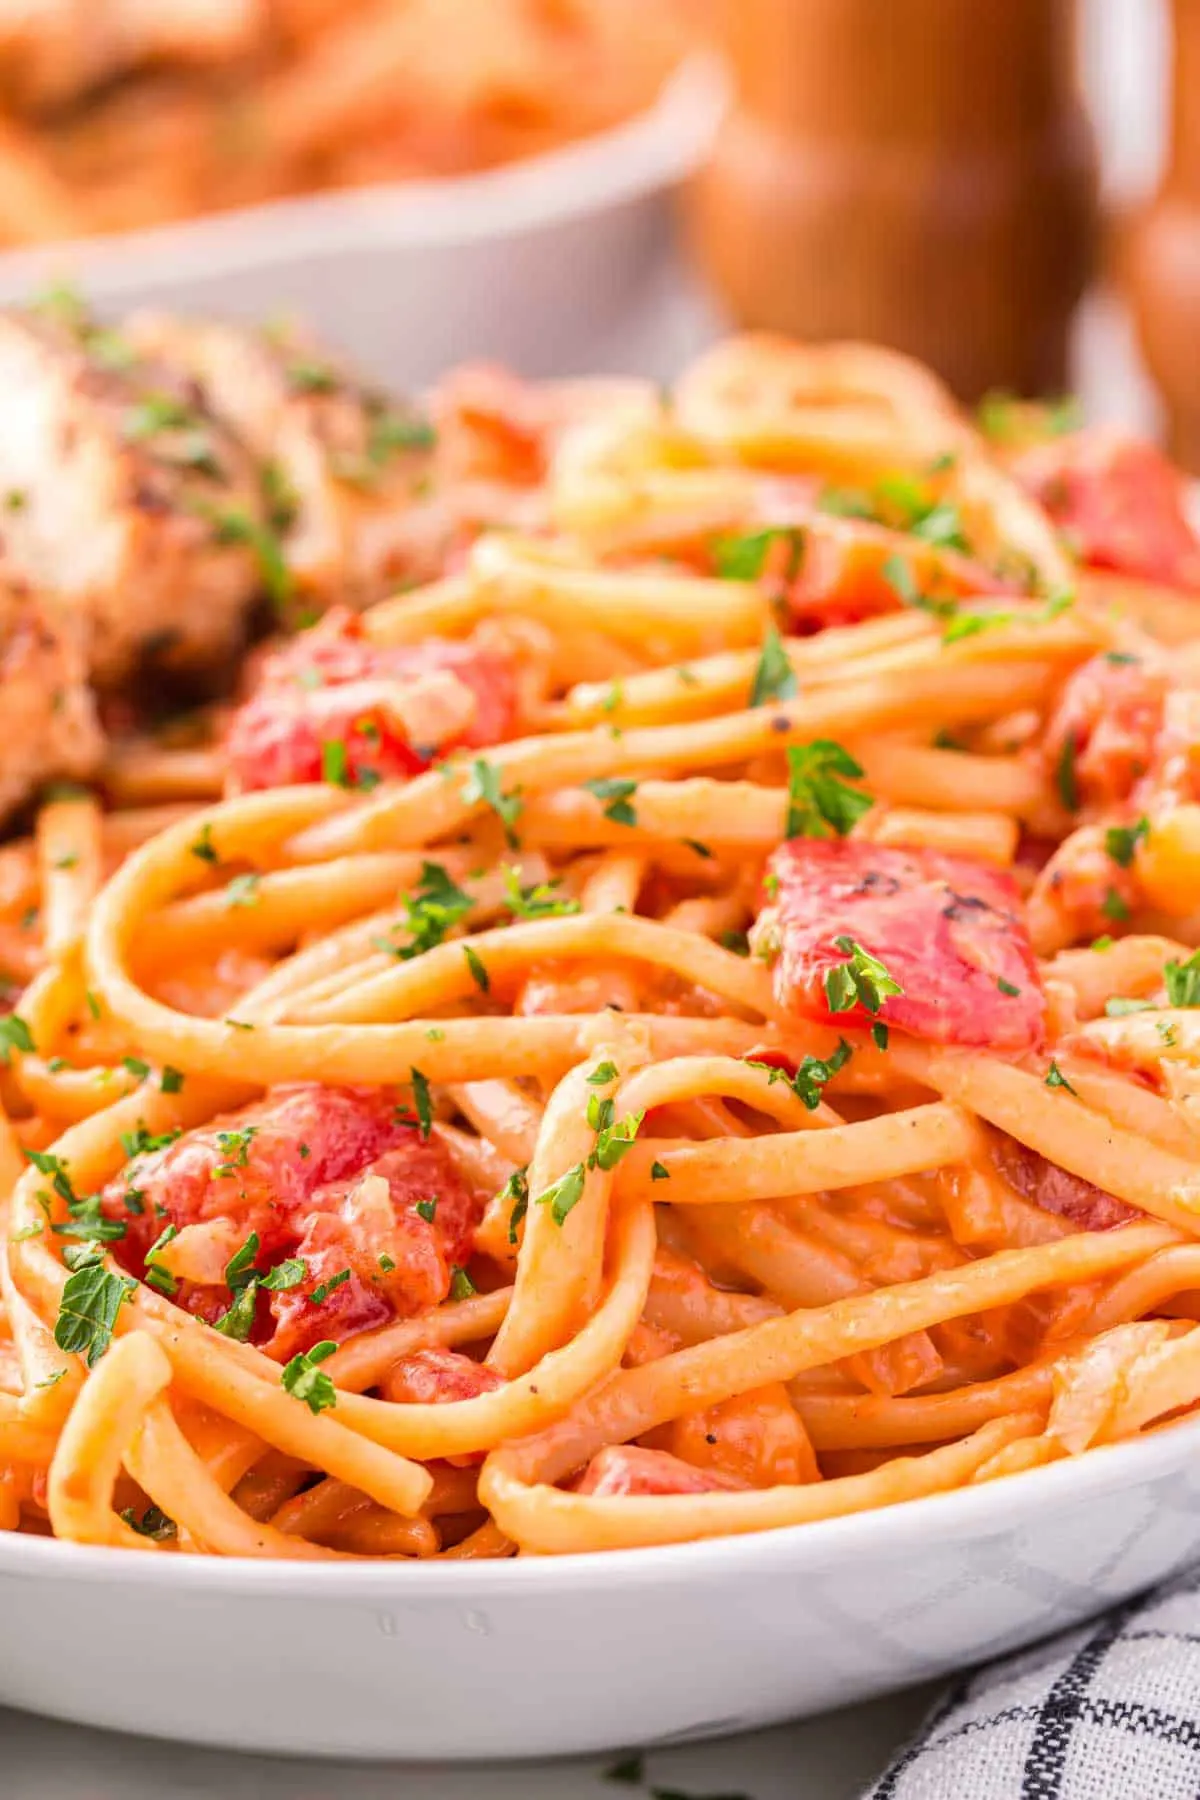 Spicy Chicken Pasta is a hearty dinner recipe loaded with strips of seasoned chicken breast, linguine, fire roasted tomatoes, chili flakes and heavy cream.